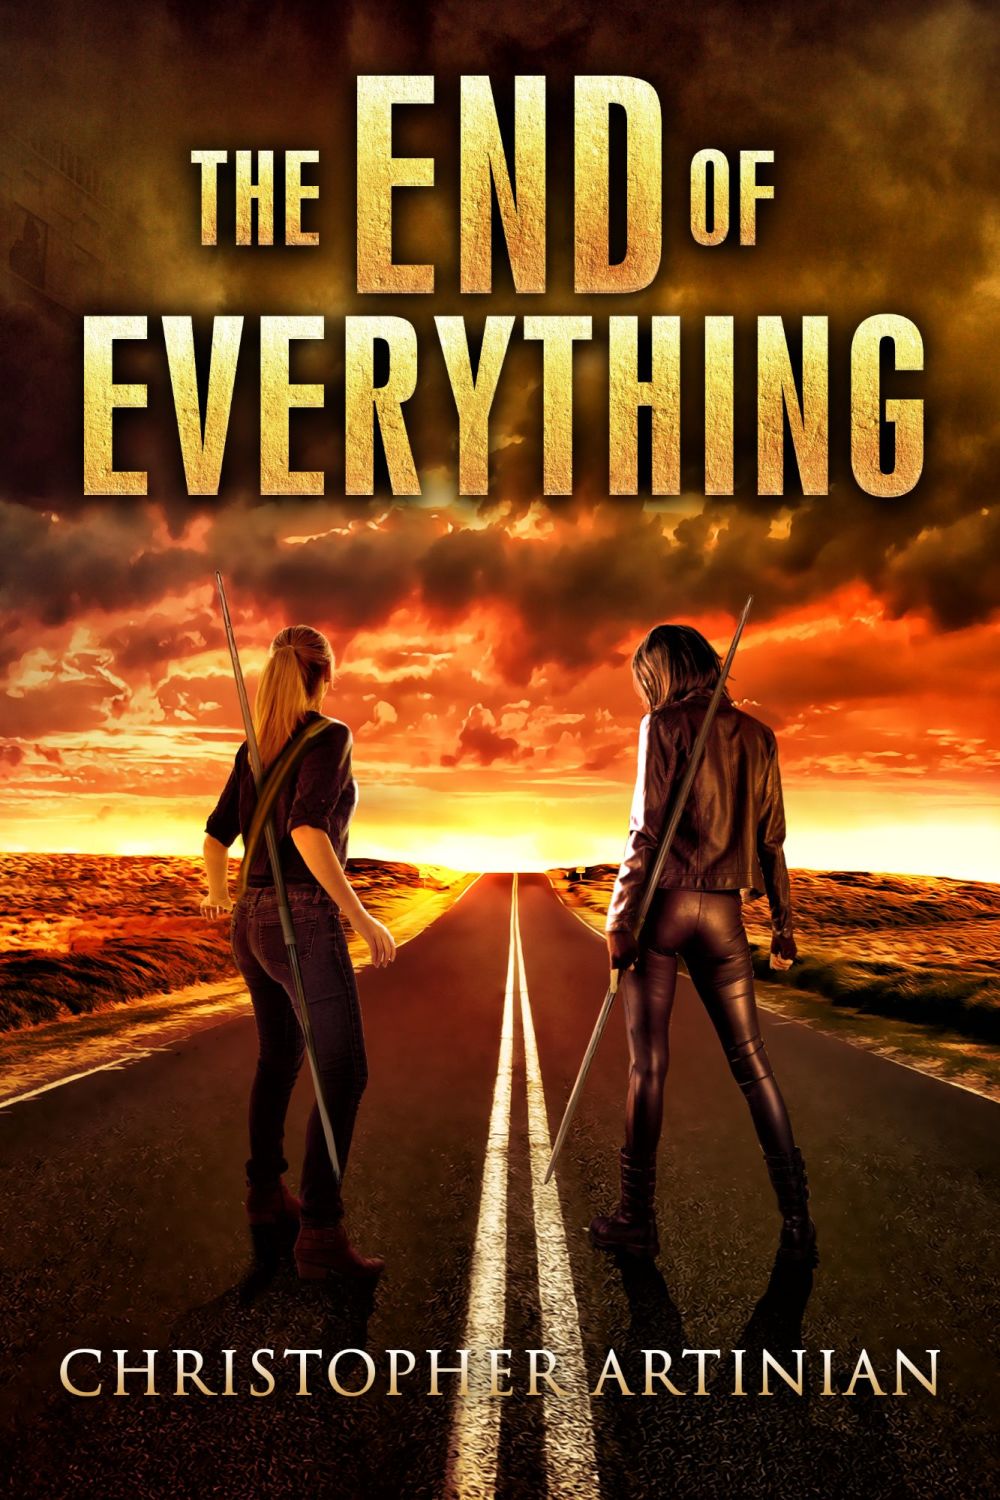 THE END OF EVERYTHING: BOOK 1 (SIGNED PAPERBACK)